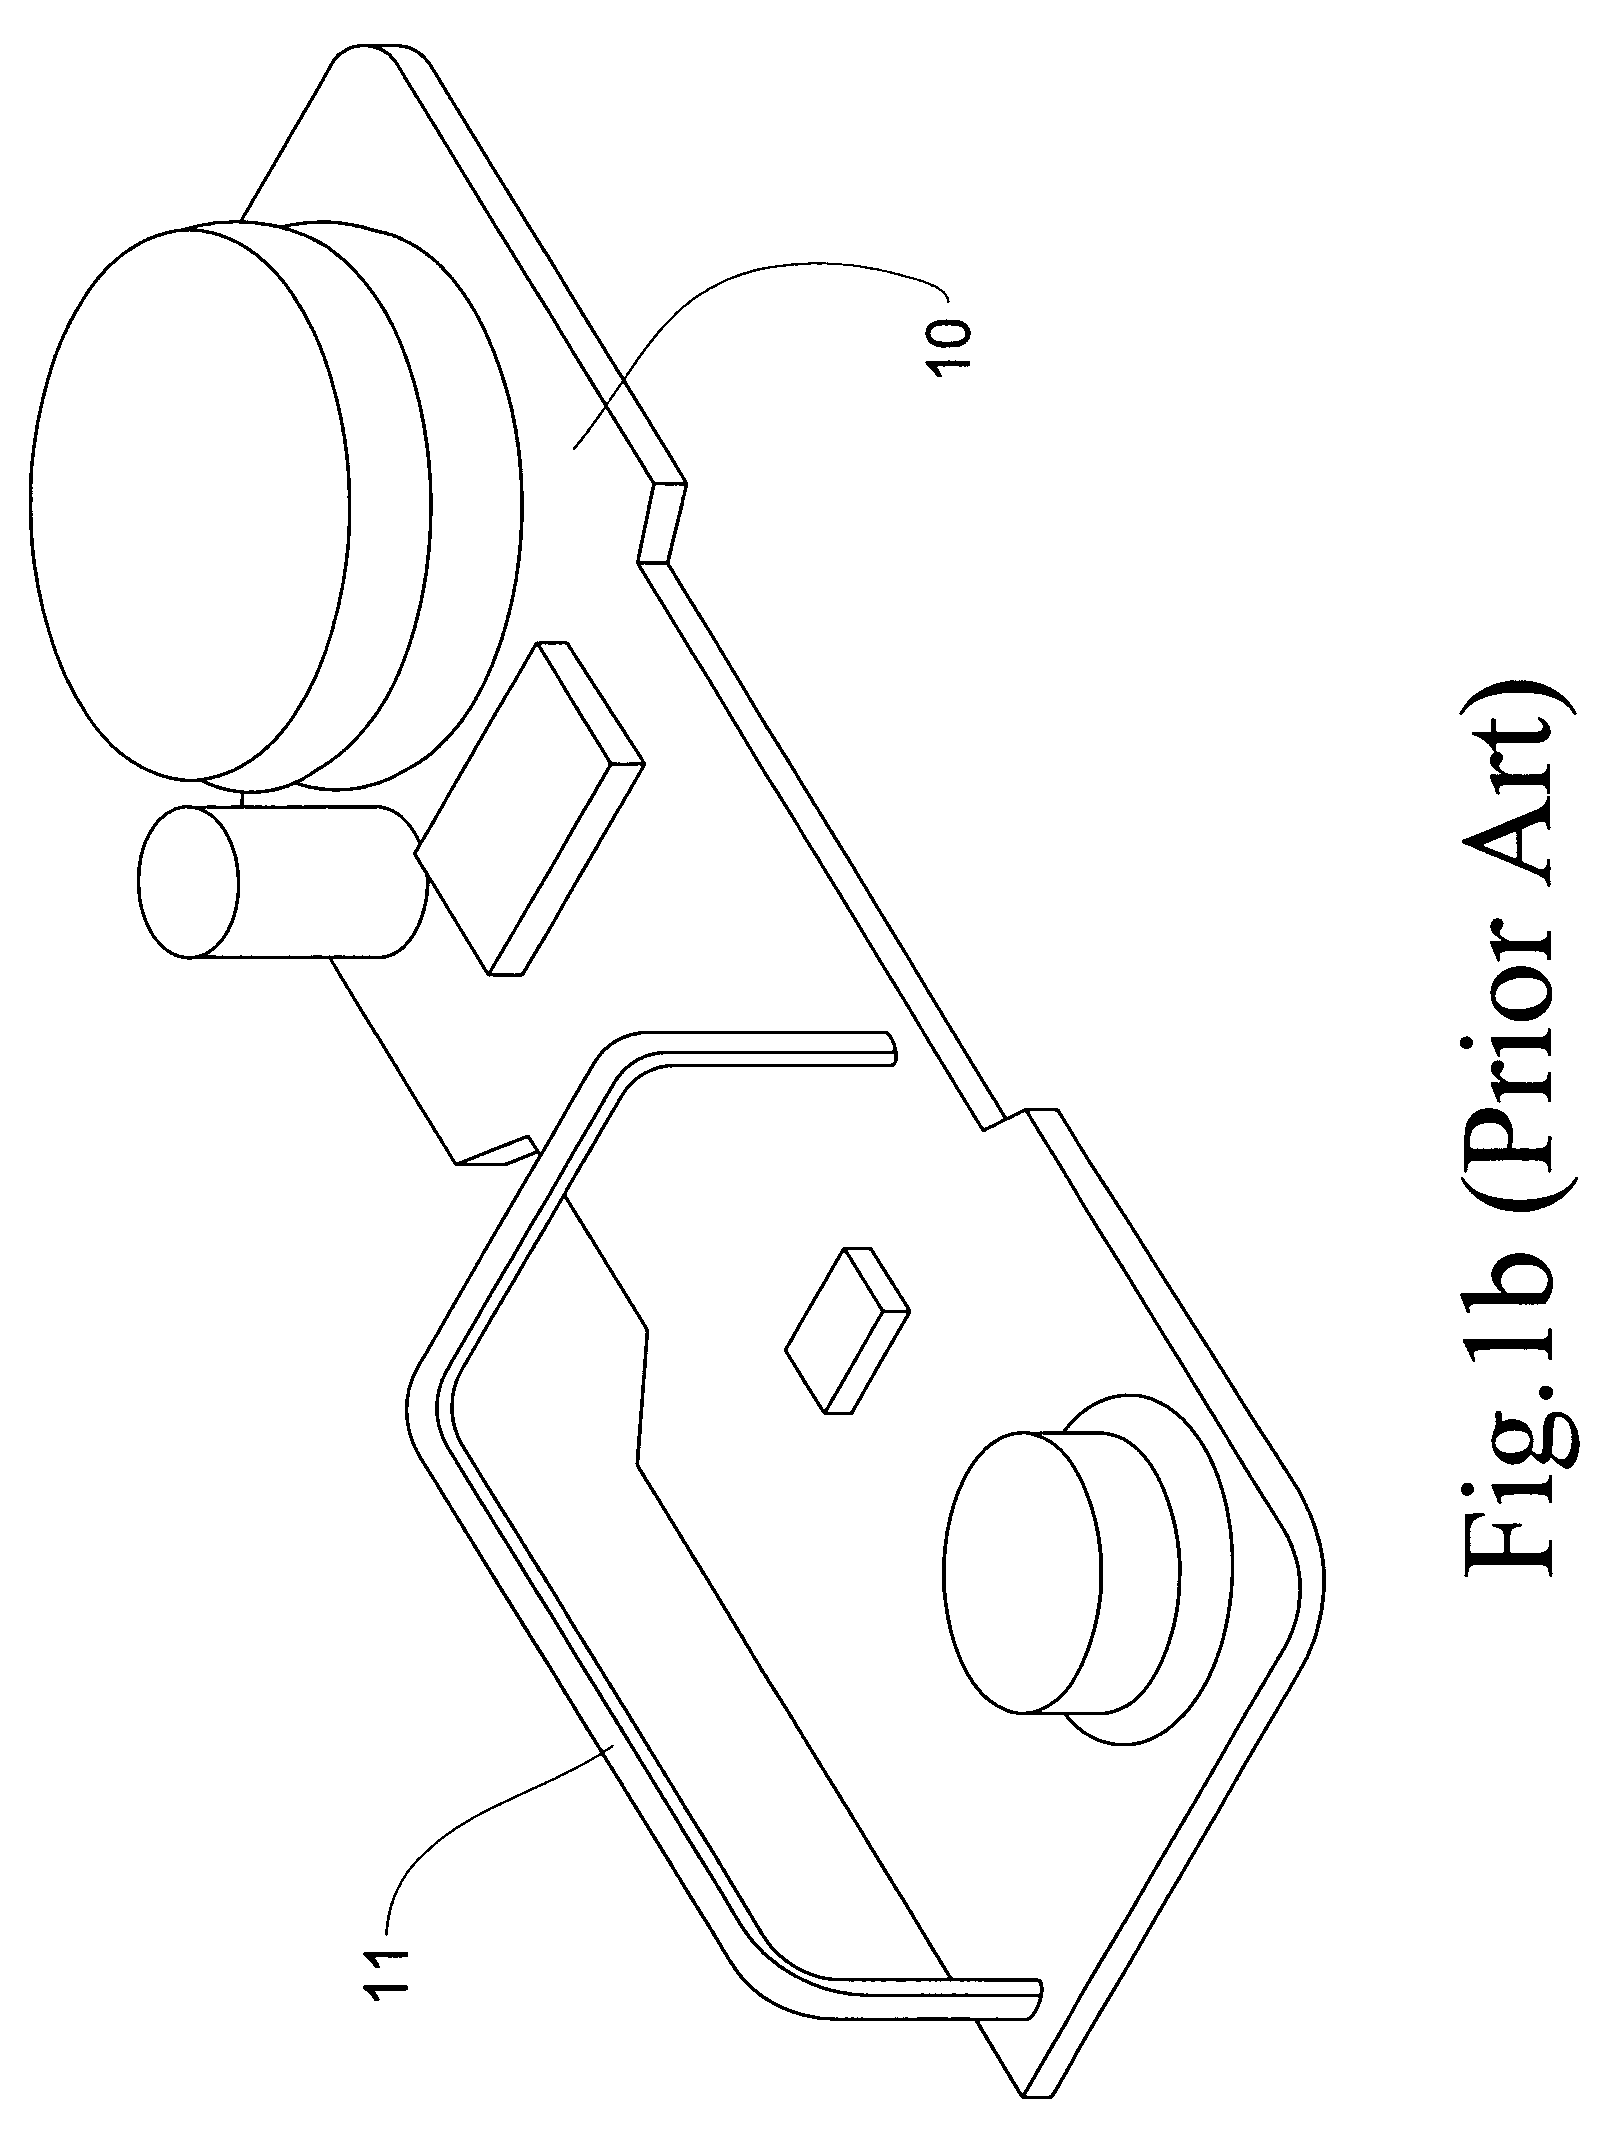 Antenna structure for TPMS transmitter